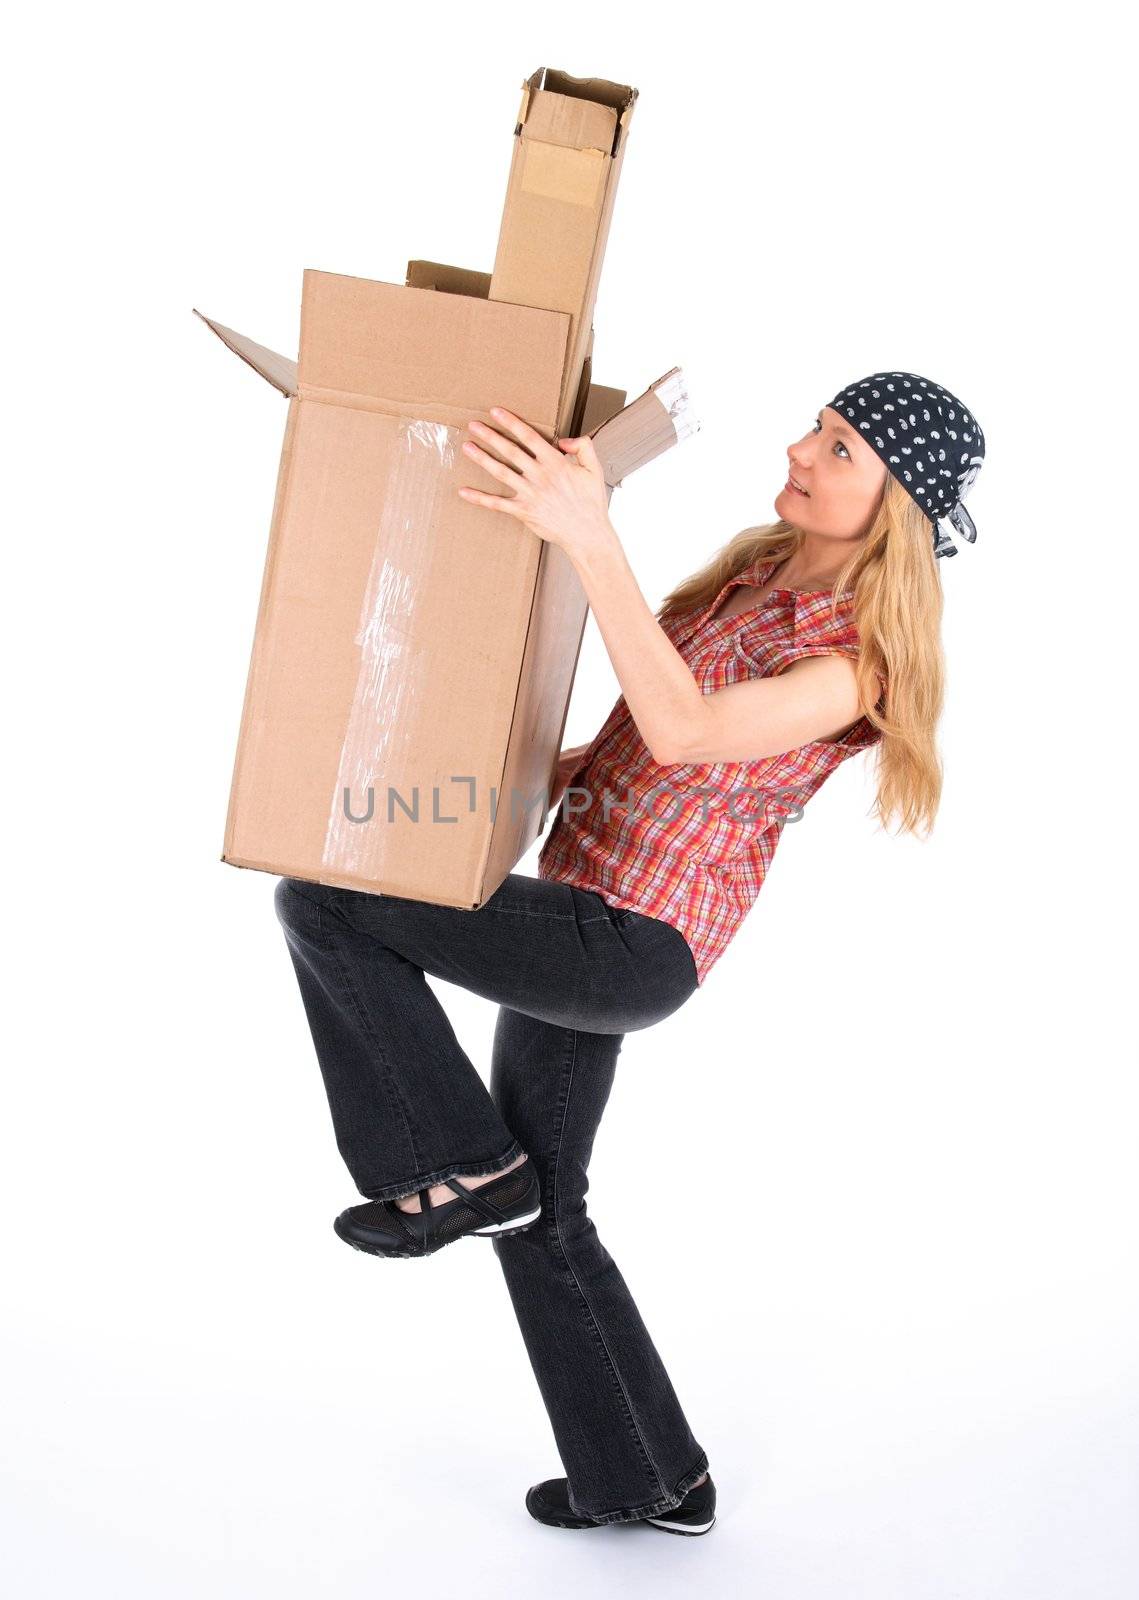 Girl balancing with cardboard boxes, white background.